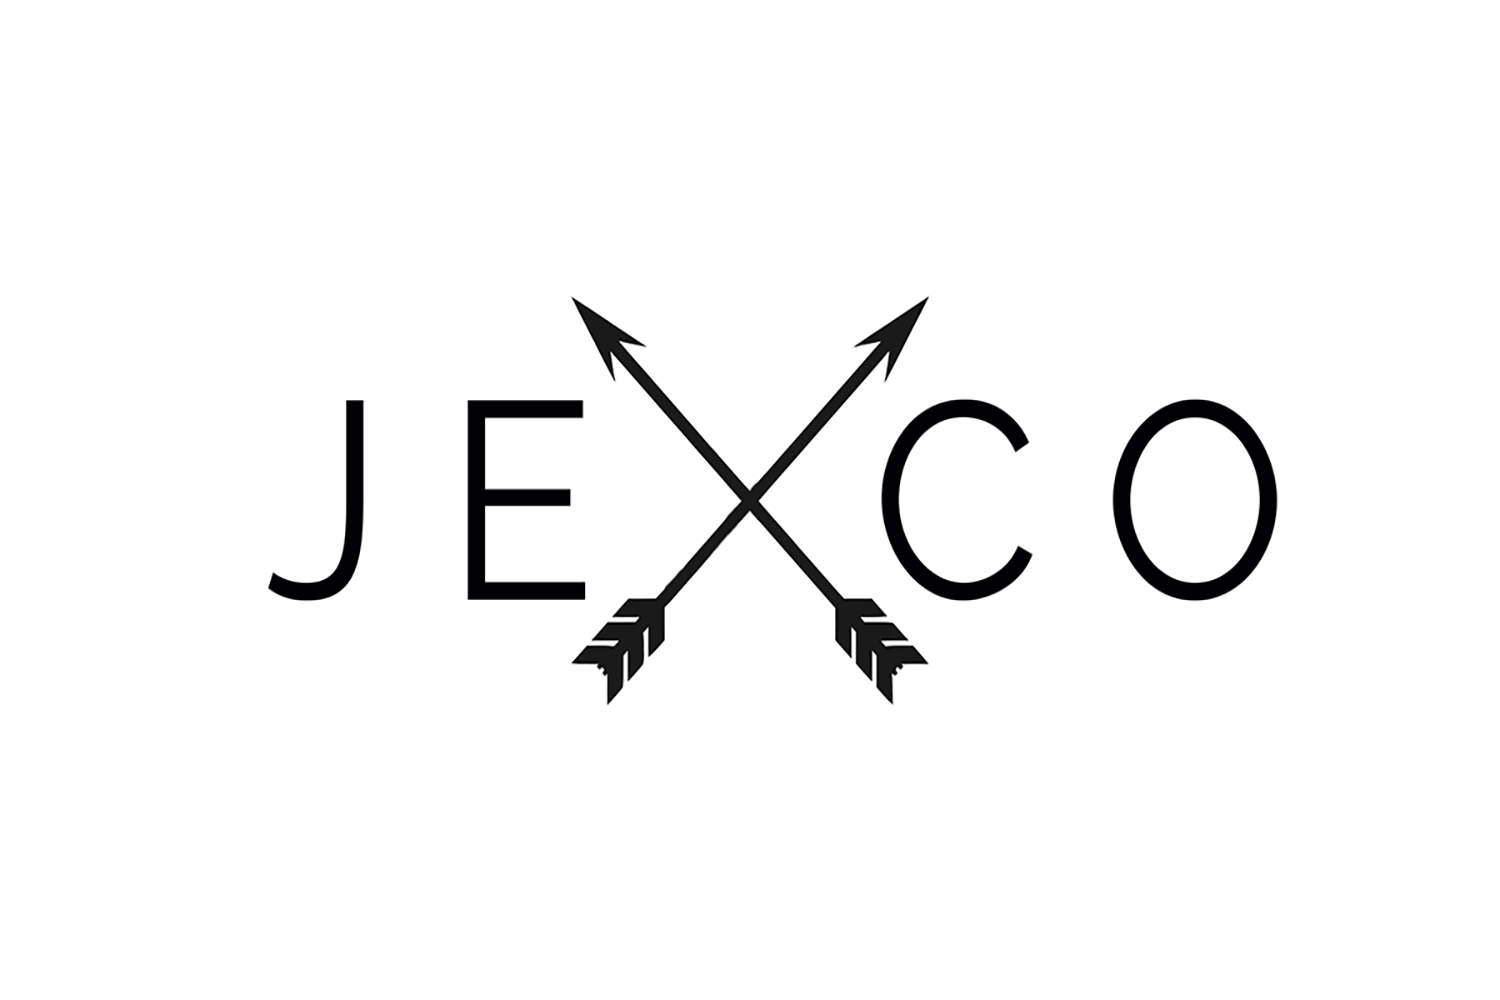 The official logo of JeXco Clothing by Jennifer Headley & Alexis Stehle, in East Liverpool Ohio.